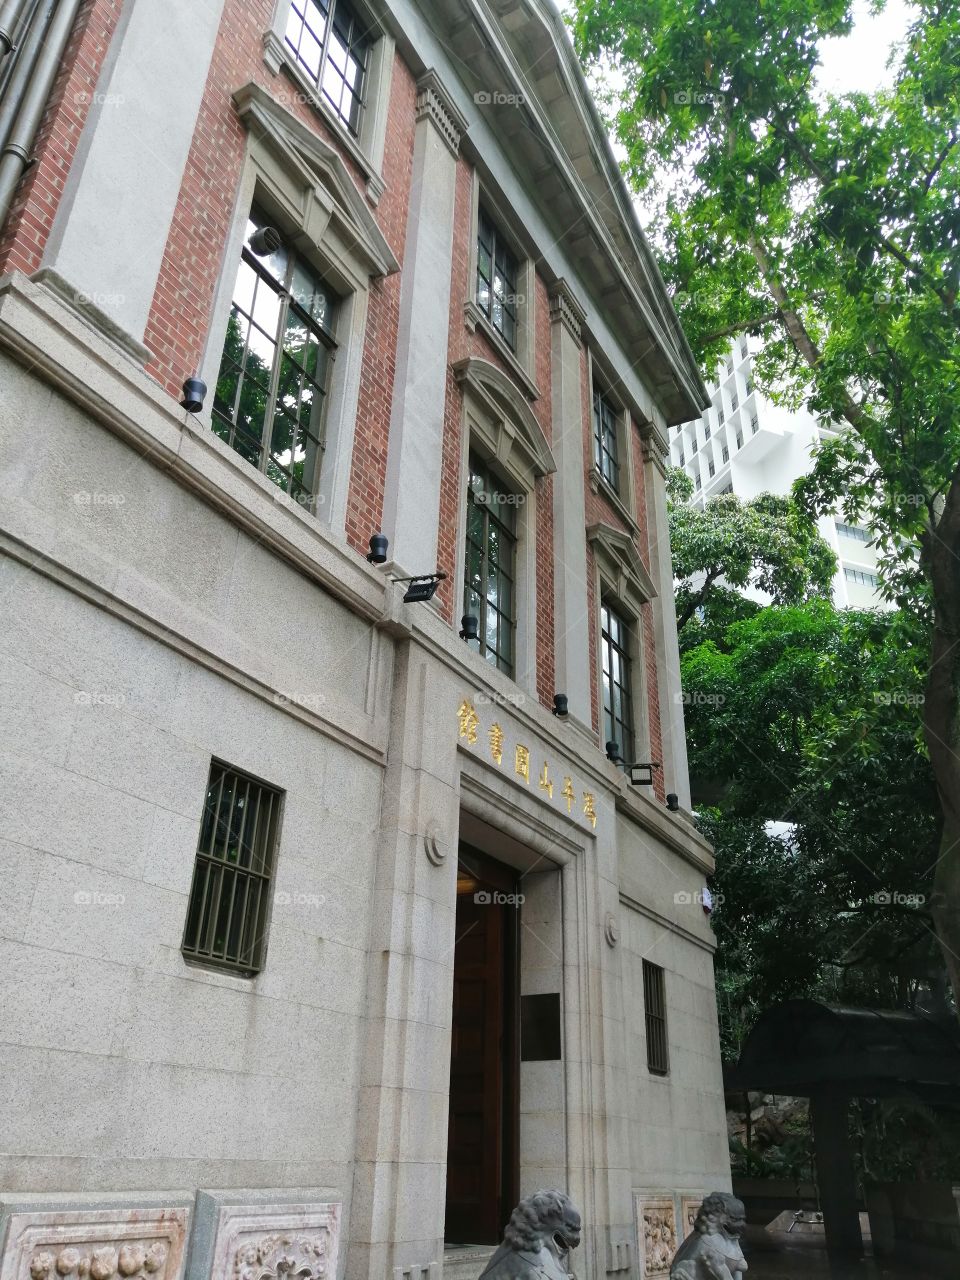 The University of Hong Kong Museum and Art Gallery